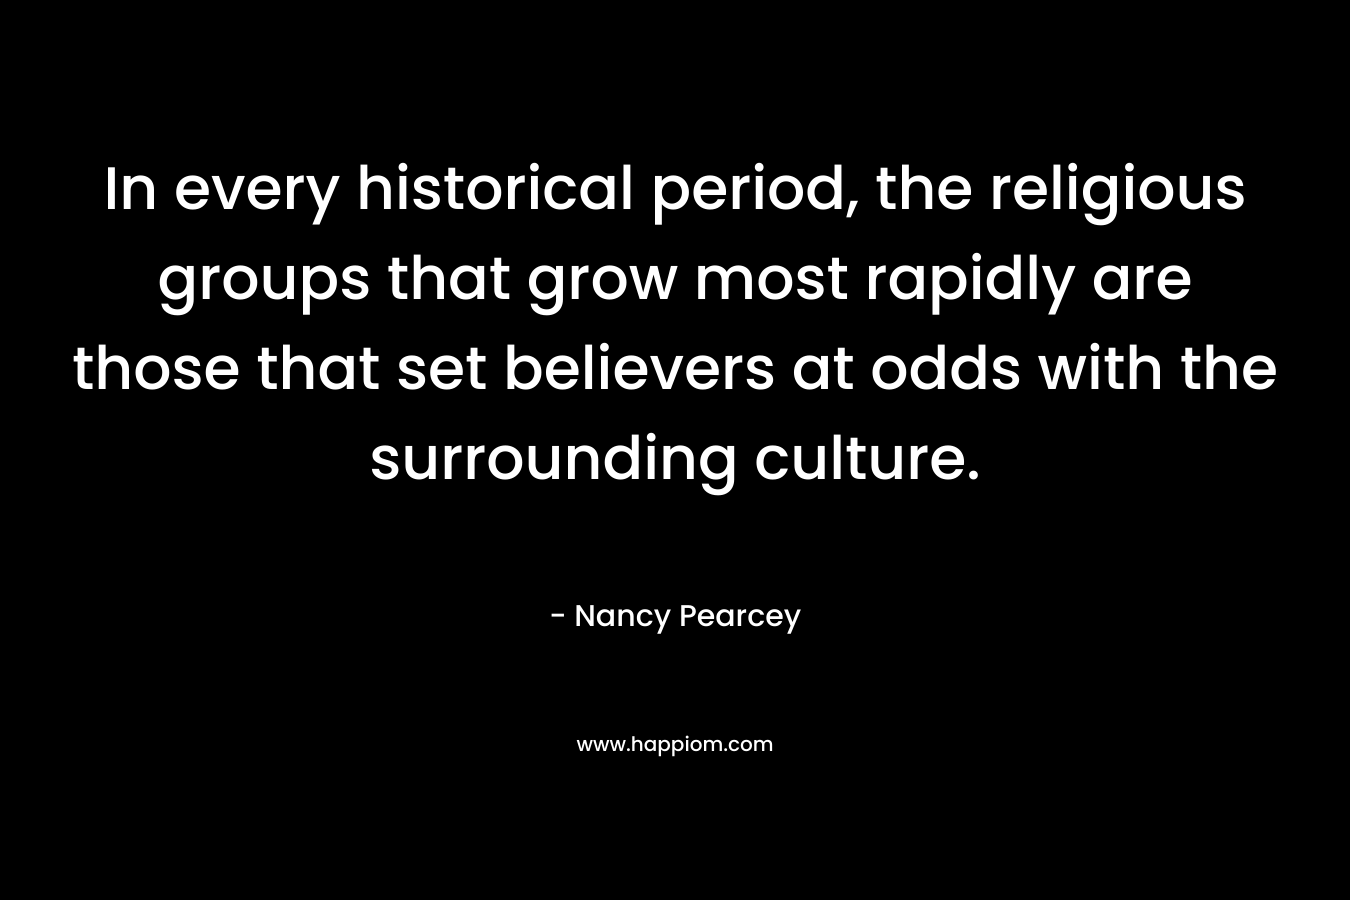 In every historical period, the religious groups that grow most rapidly are those that set believers at odds with the surrounding culture. – Nancy Pearcey